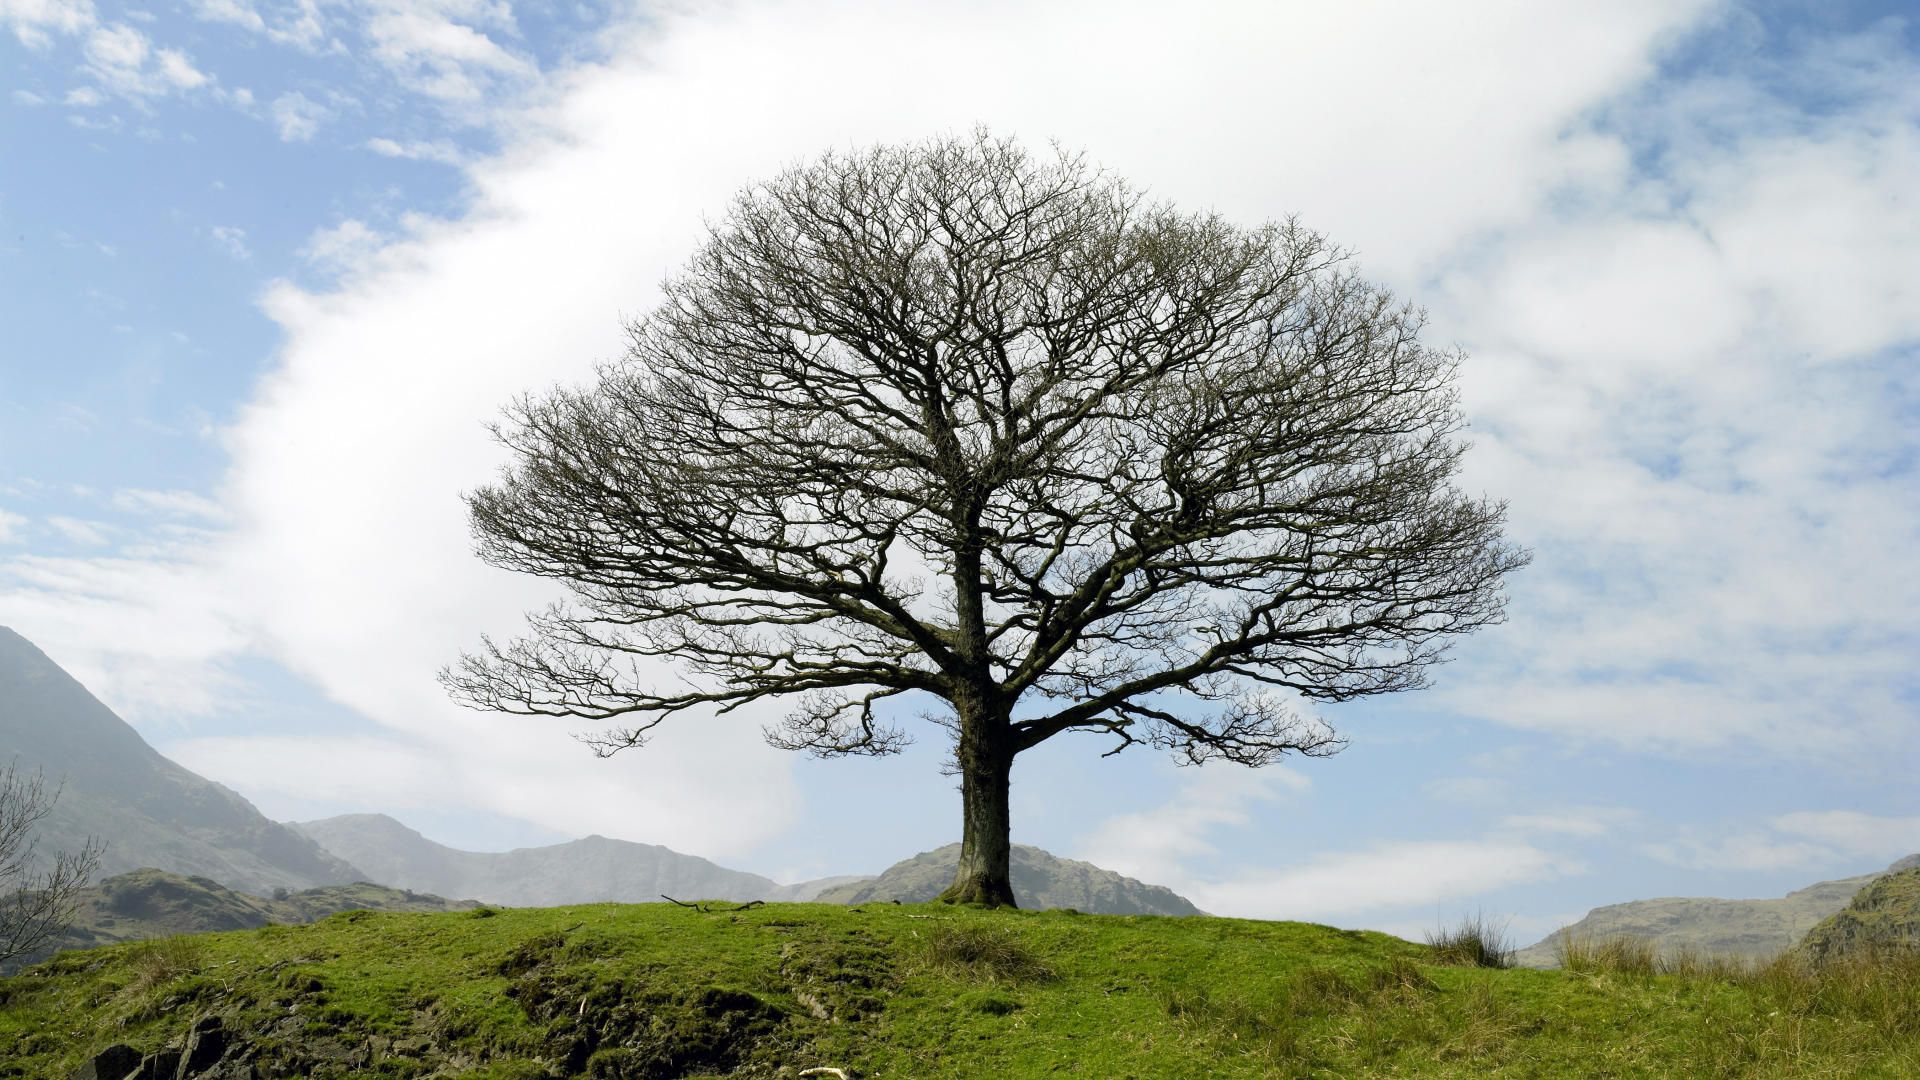 Download Wallpaper tree clouds uk england united kingdom, 1920x Dry Tree, Little Langdale, Lake District, England